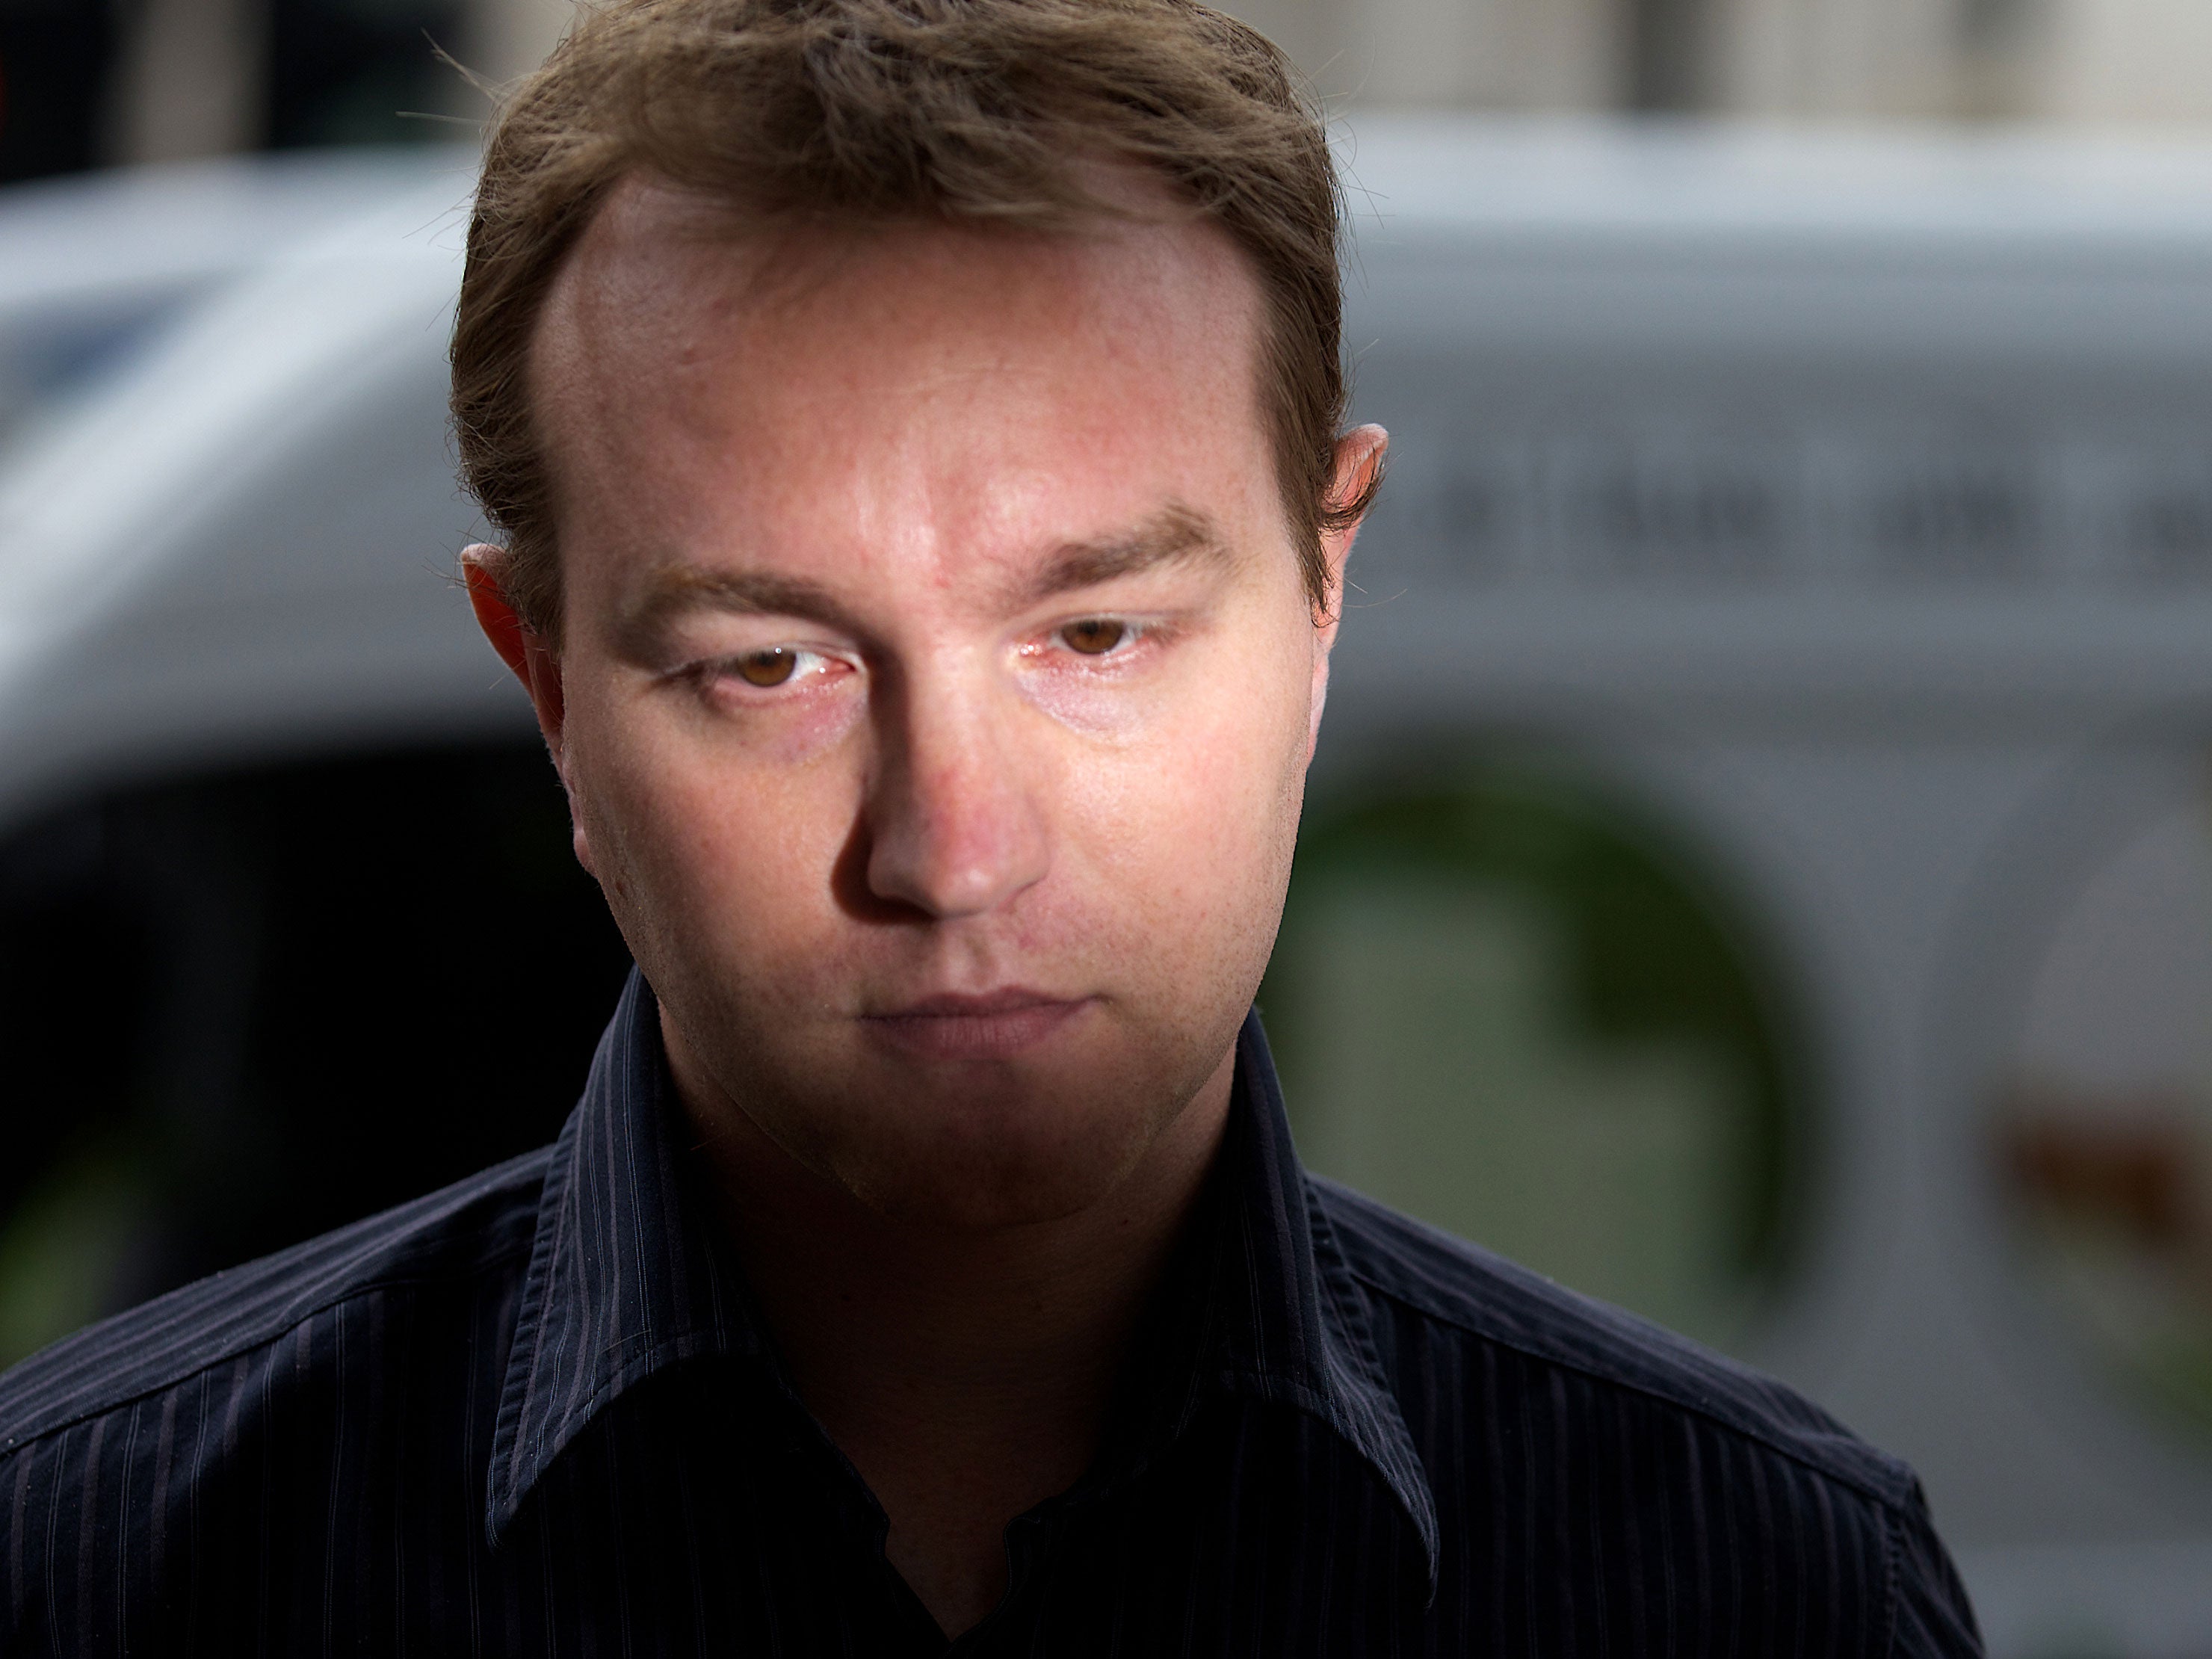 UK trader Tom Hayes is accused of eight counts of conspiracy to defraud in the Libor scandal